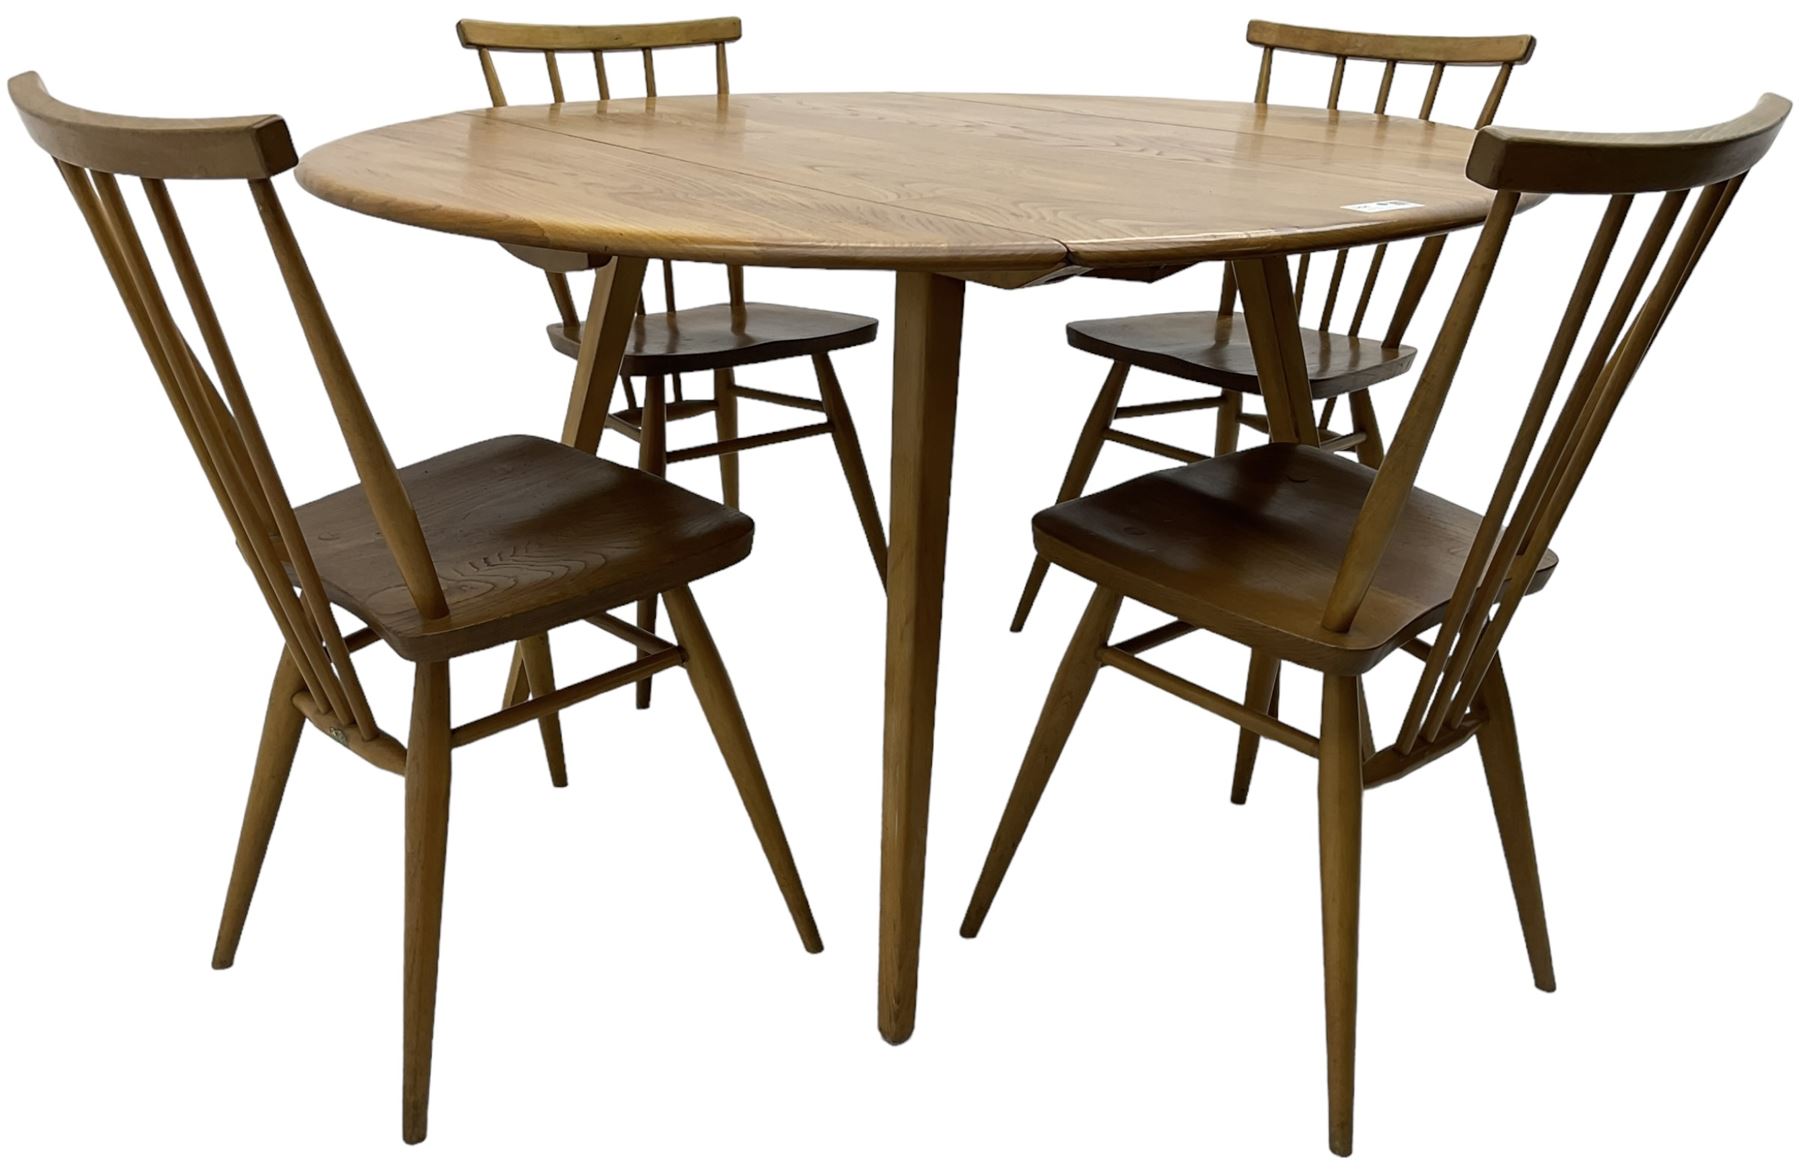 Ercol - elm and beech dining table - Image 4 of 6